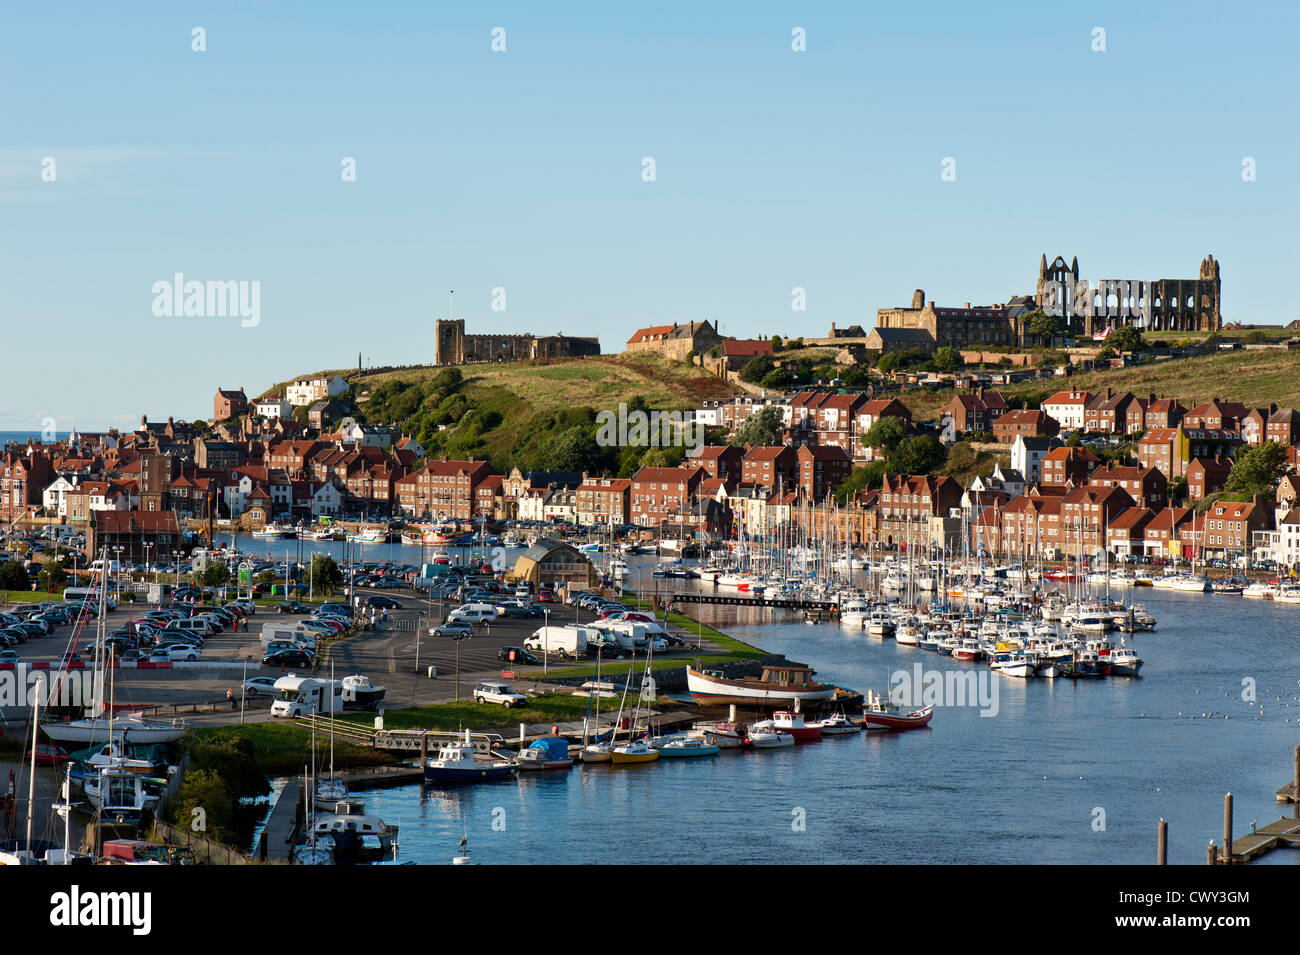 View of Whitby and River Esk, North Yorkshire, United Kingdom Stock Photo